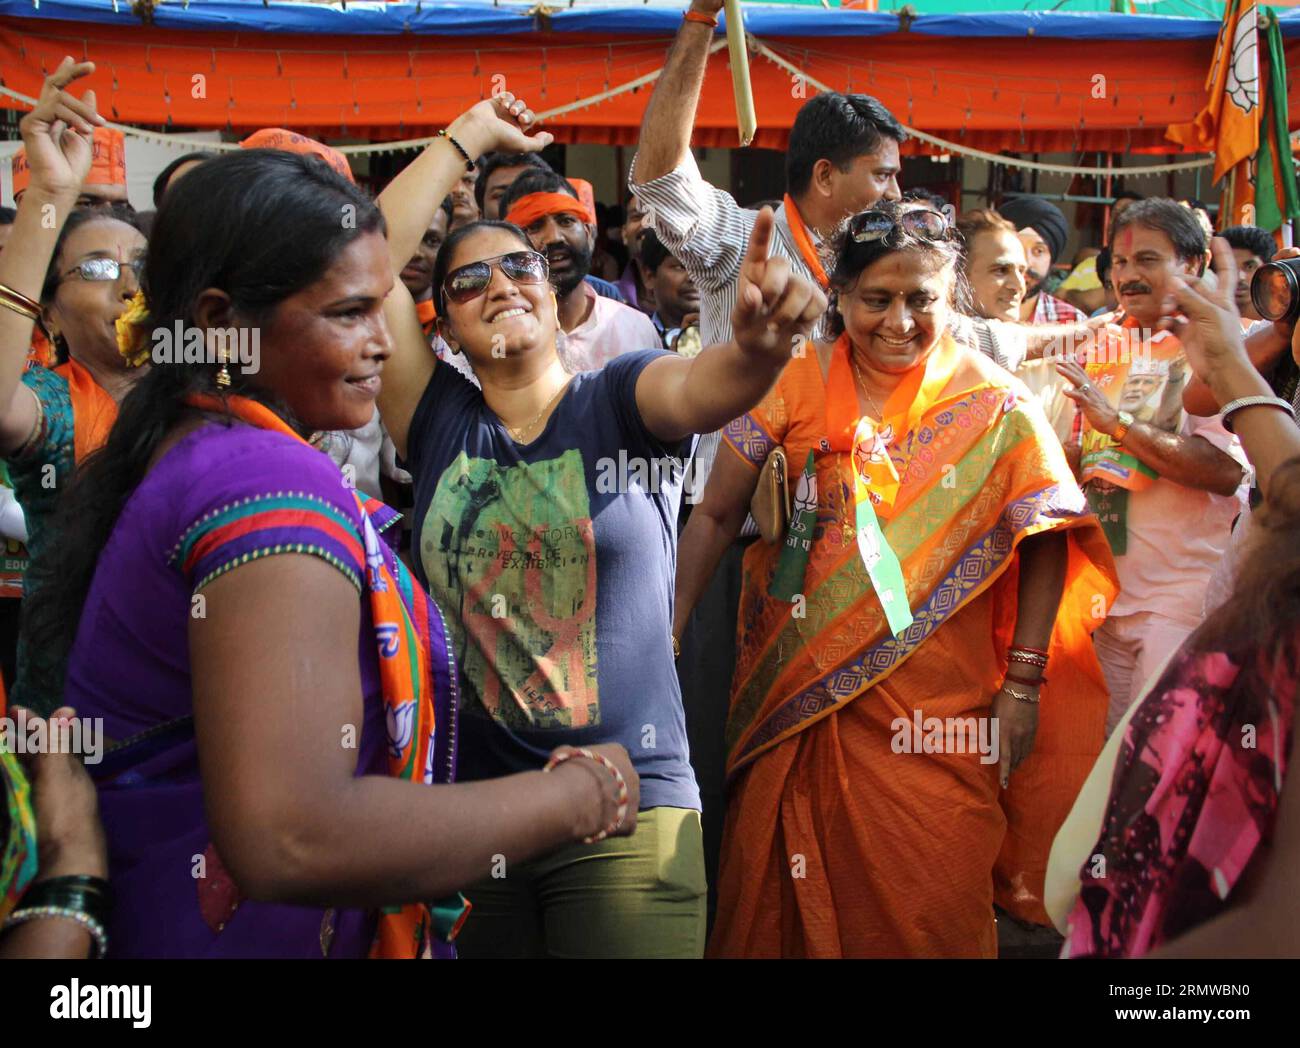 (141019) -- MUMBAI, Oct. 19, 2014 -- Supporters of India s ruling Bharatiya Janata Party (BJP) celebrate as early results indicated the party leading in the Maharashtra state assembly elections in Mumbai, India, Oct. 19, 2014. India s ruling Bharatiya Janata Party (BJP) has won control of the country s financial capital Mumbai through a legislative election in the state of Maharashtra, while also grasping the northern state of Haryana from the Congress, said vote counting results Sunday. ) INDIA-MUMBAI-BJP-CELEBRATION Stringer PUBLICATIONxNOTxINxCHN   Mumbai OCT 19 2014 Supporters of India S r Stock Photo